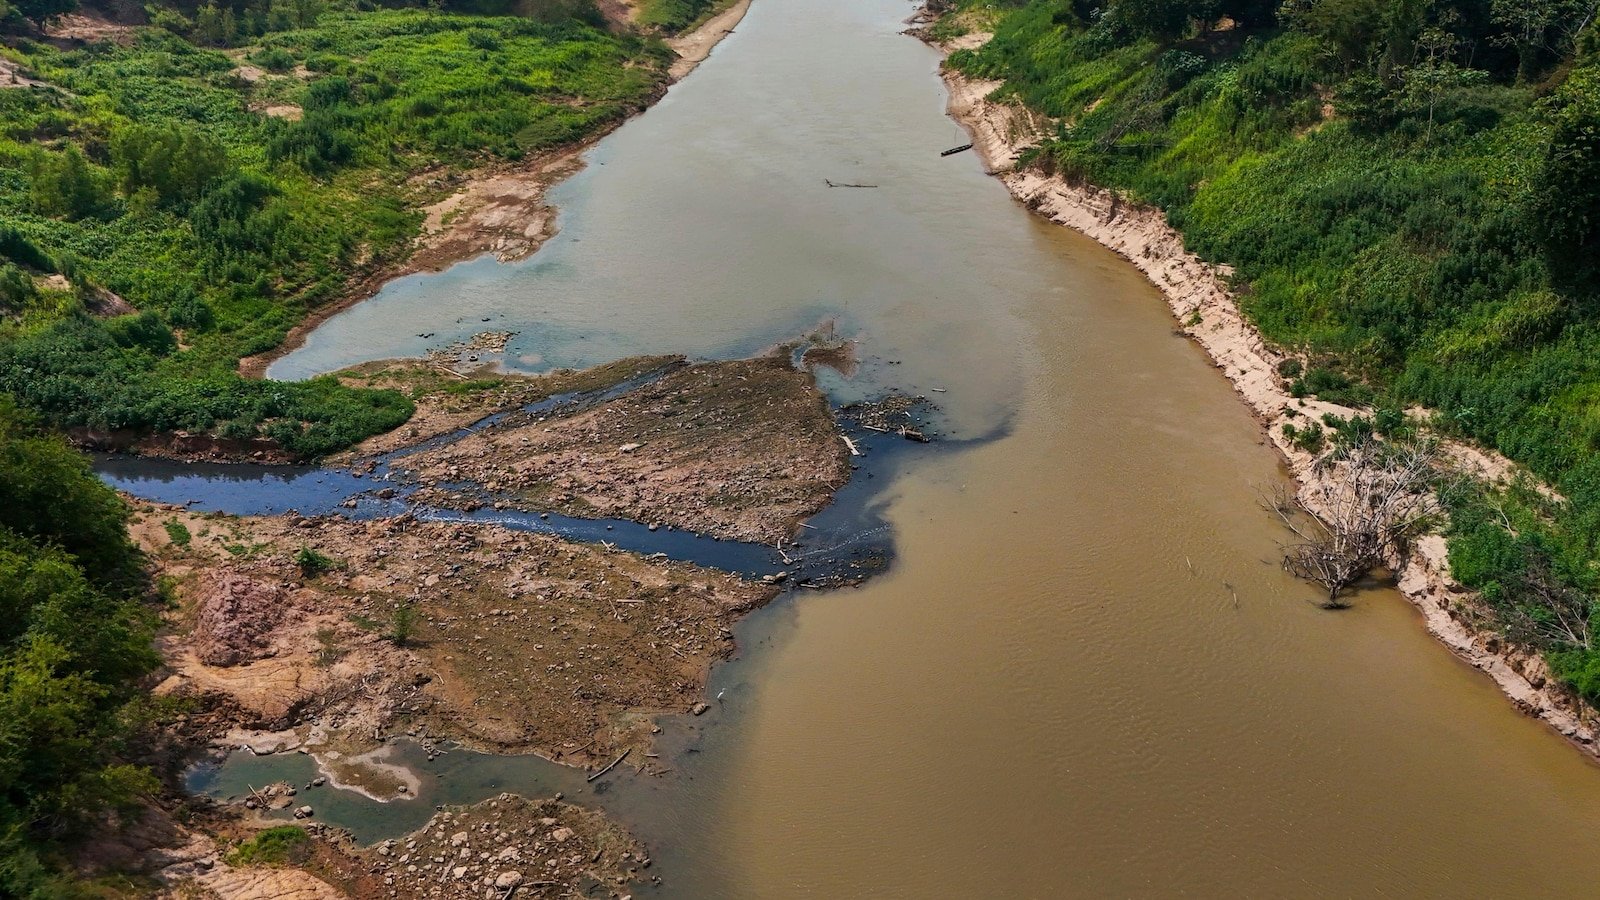 Severe drought has returned to the Amazon. And it's happening earlier than expected